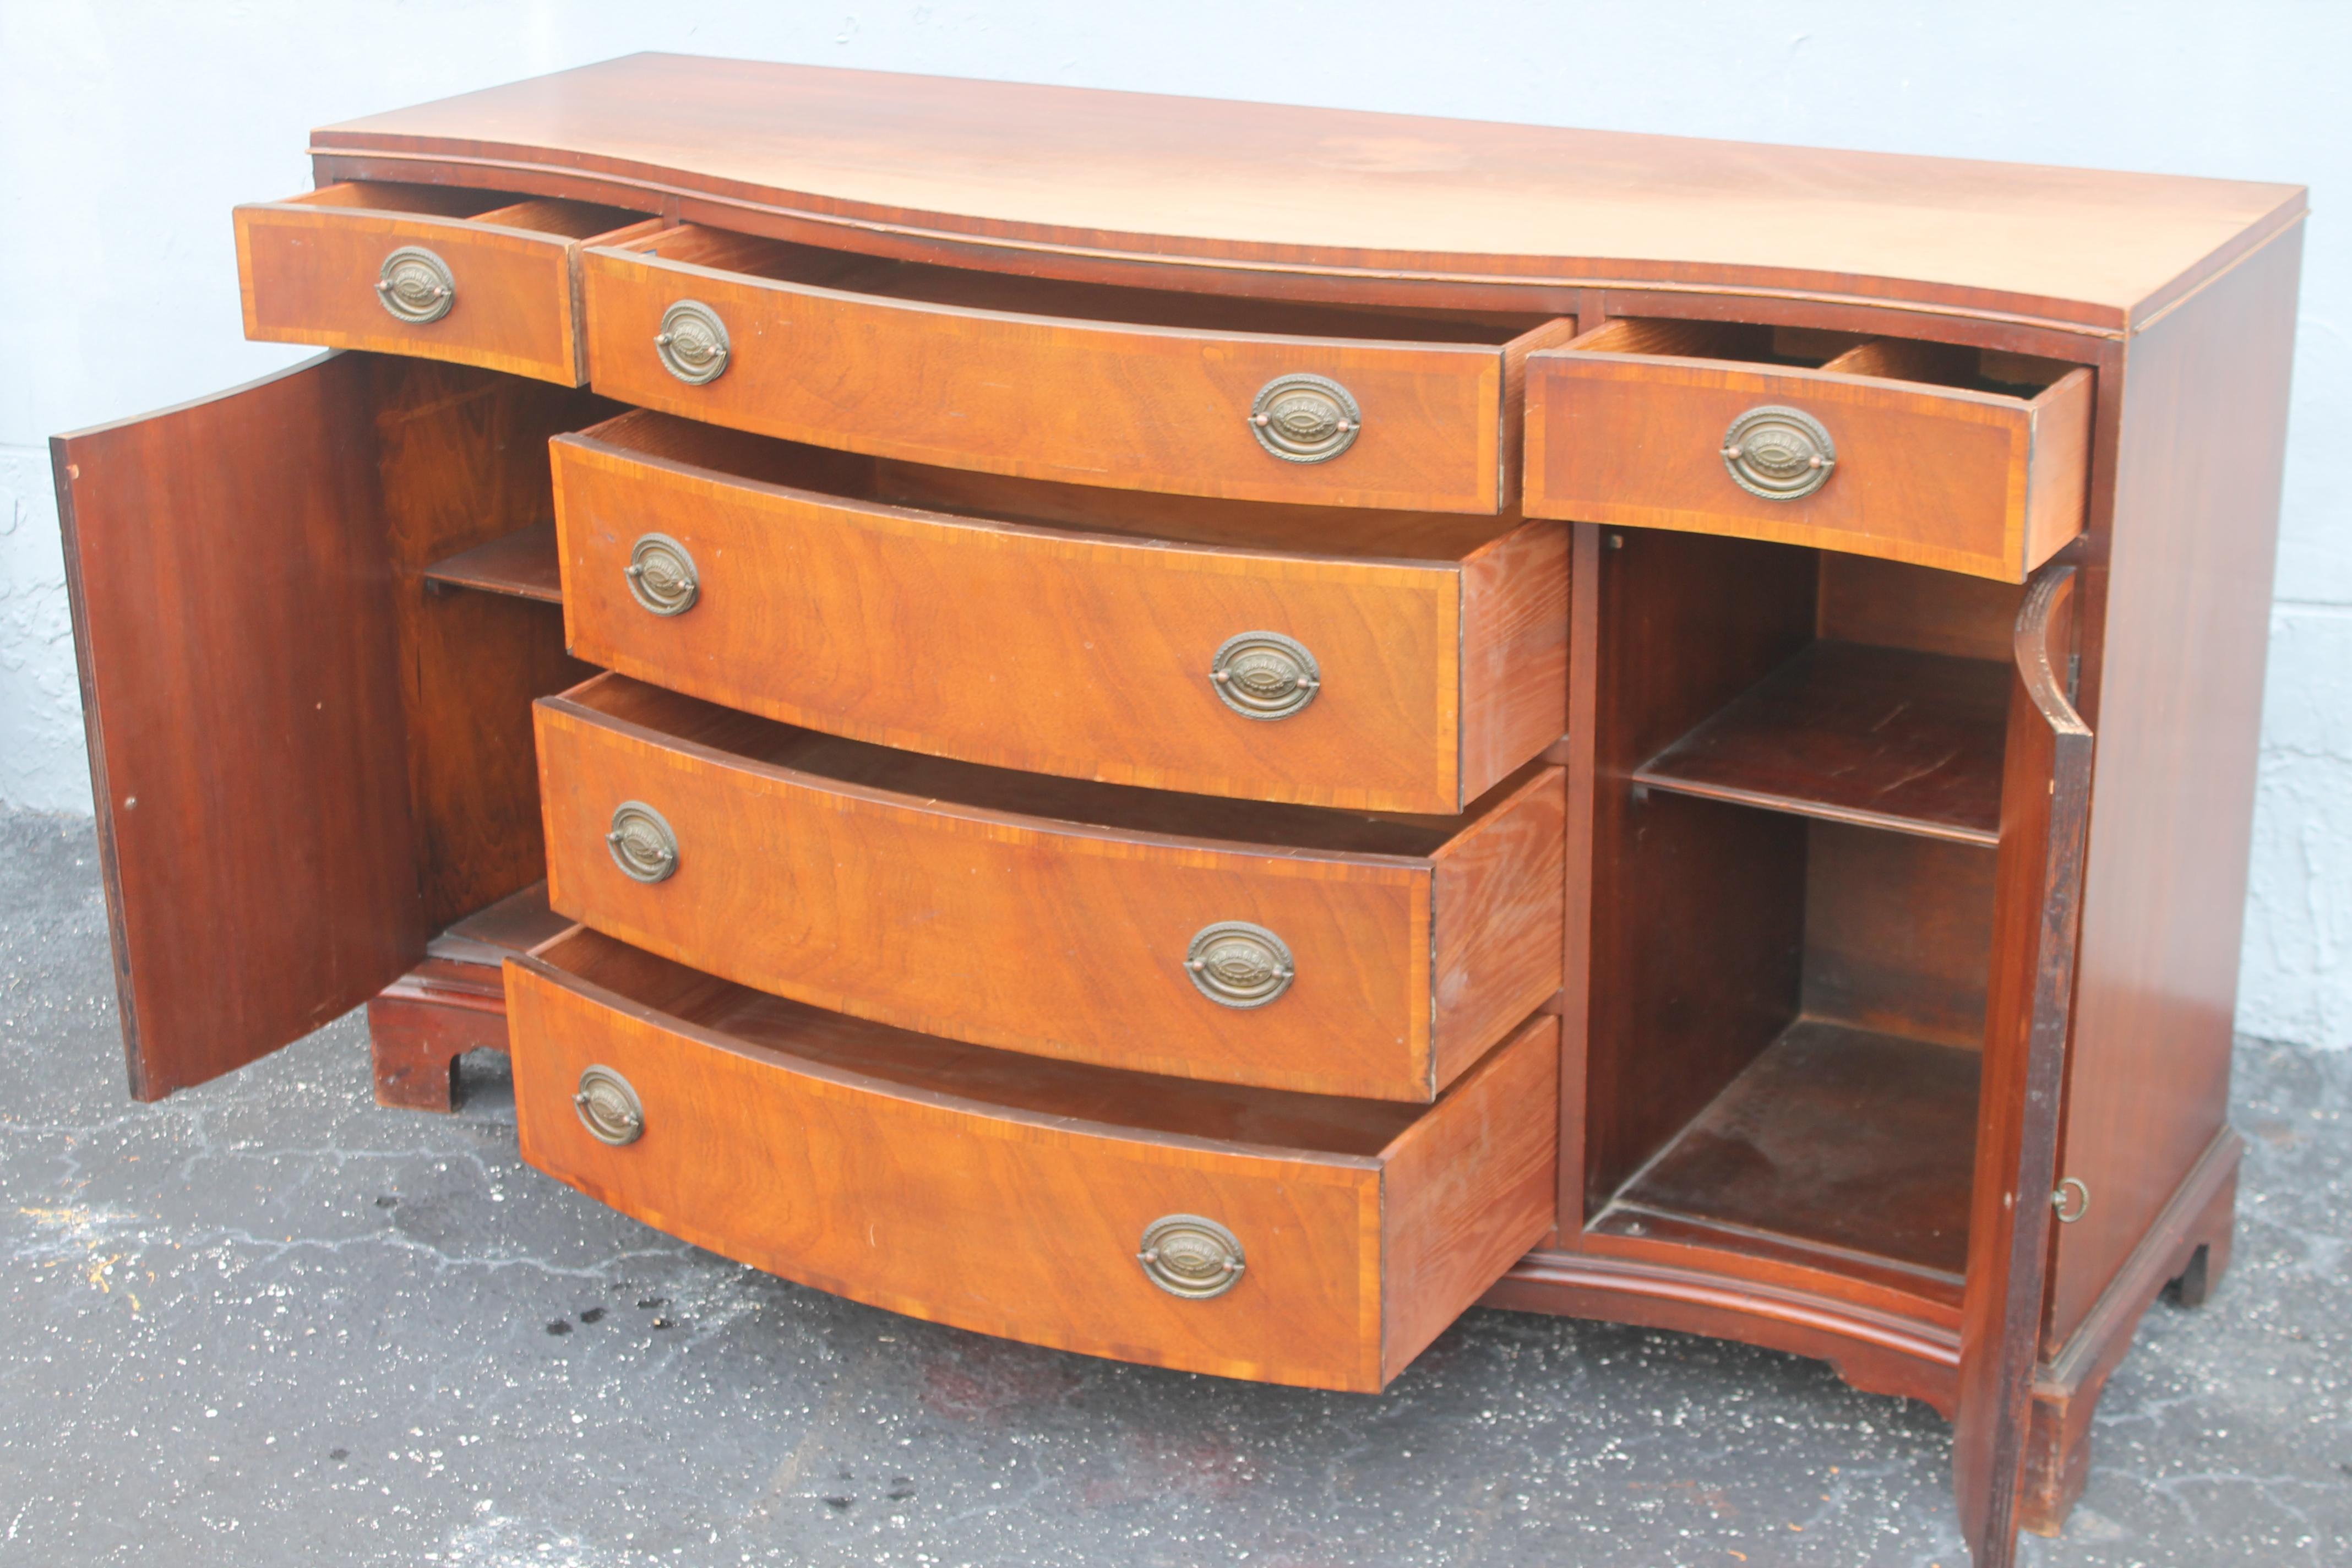 1940's Traditional style Mahogany Buffet/ Sideboard/ Credenza/ Dry Bar In Good Condition For Sale In Opa Locka, FL